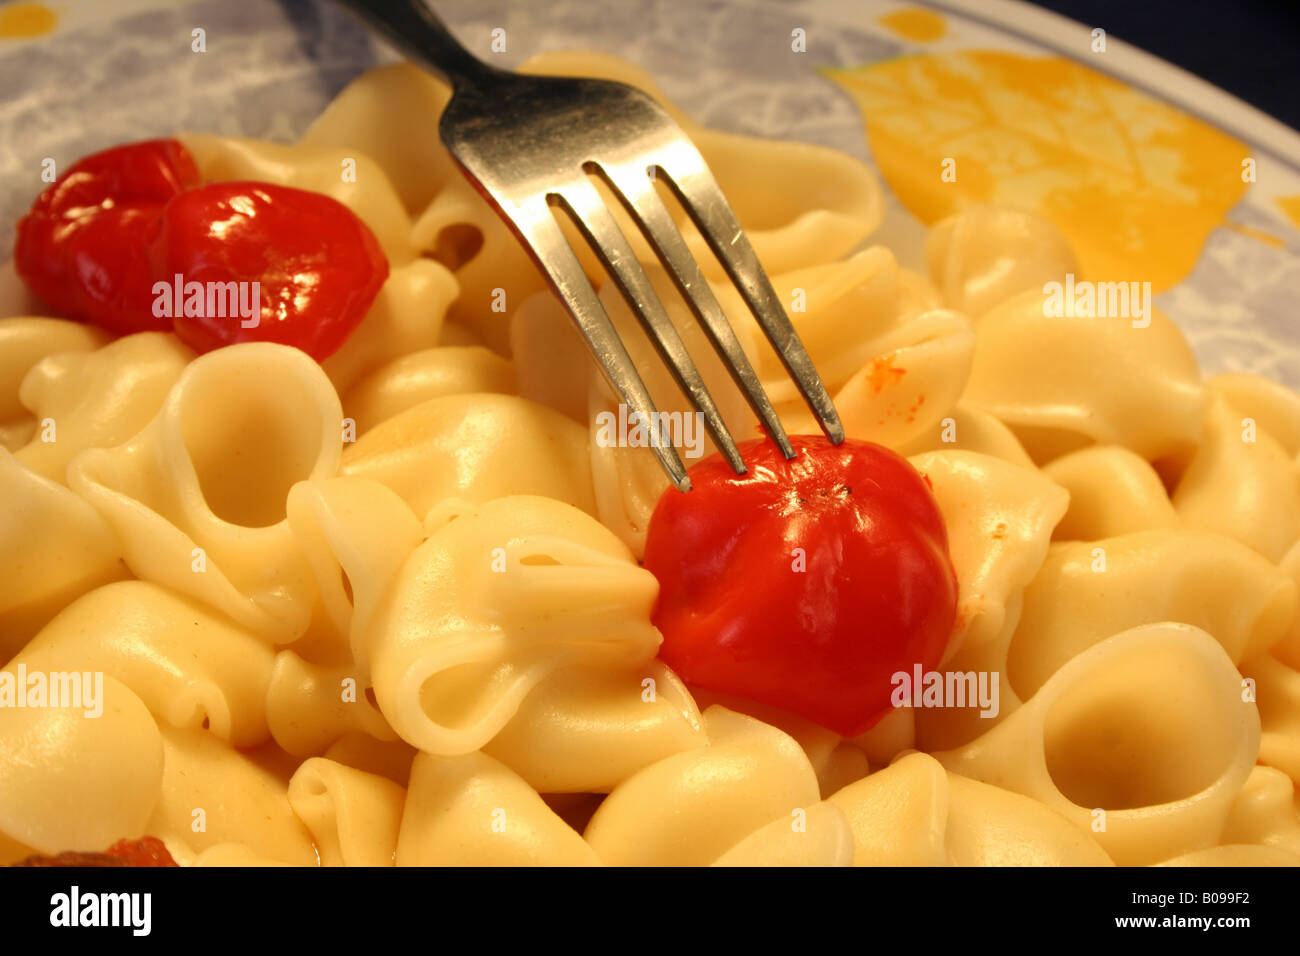 Pasta dish with fork. Stock Photo